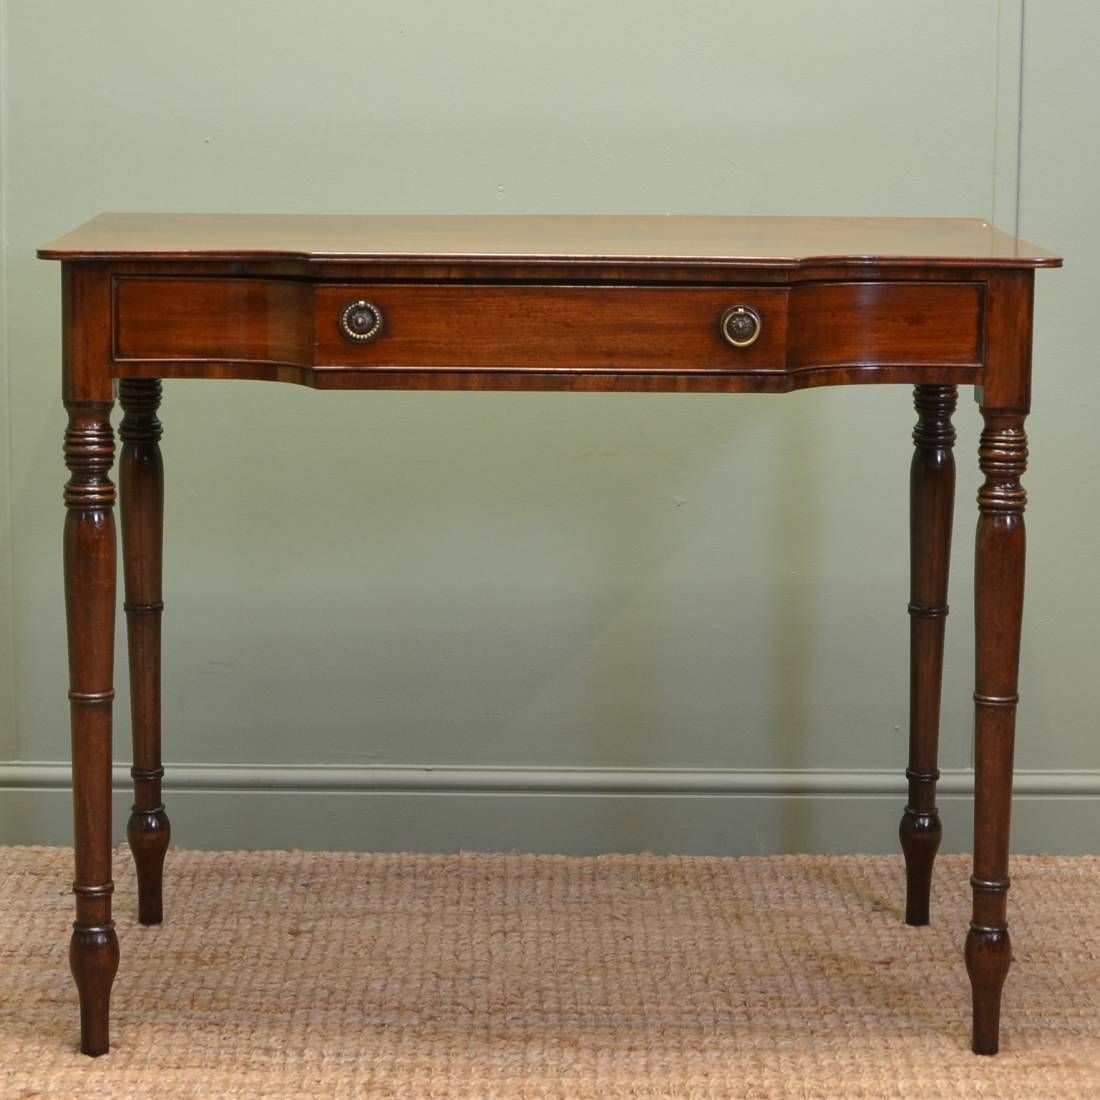 Sensational Regency Mahogany Antique Console / Side Table With Regard To Antique Brass Round Console Tables (View 18 of 20)